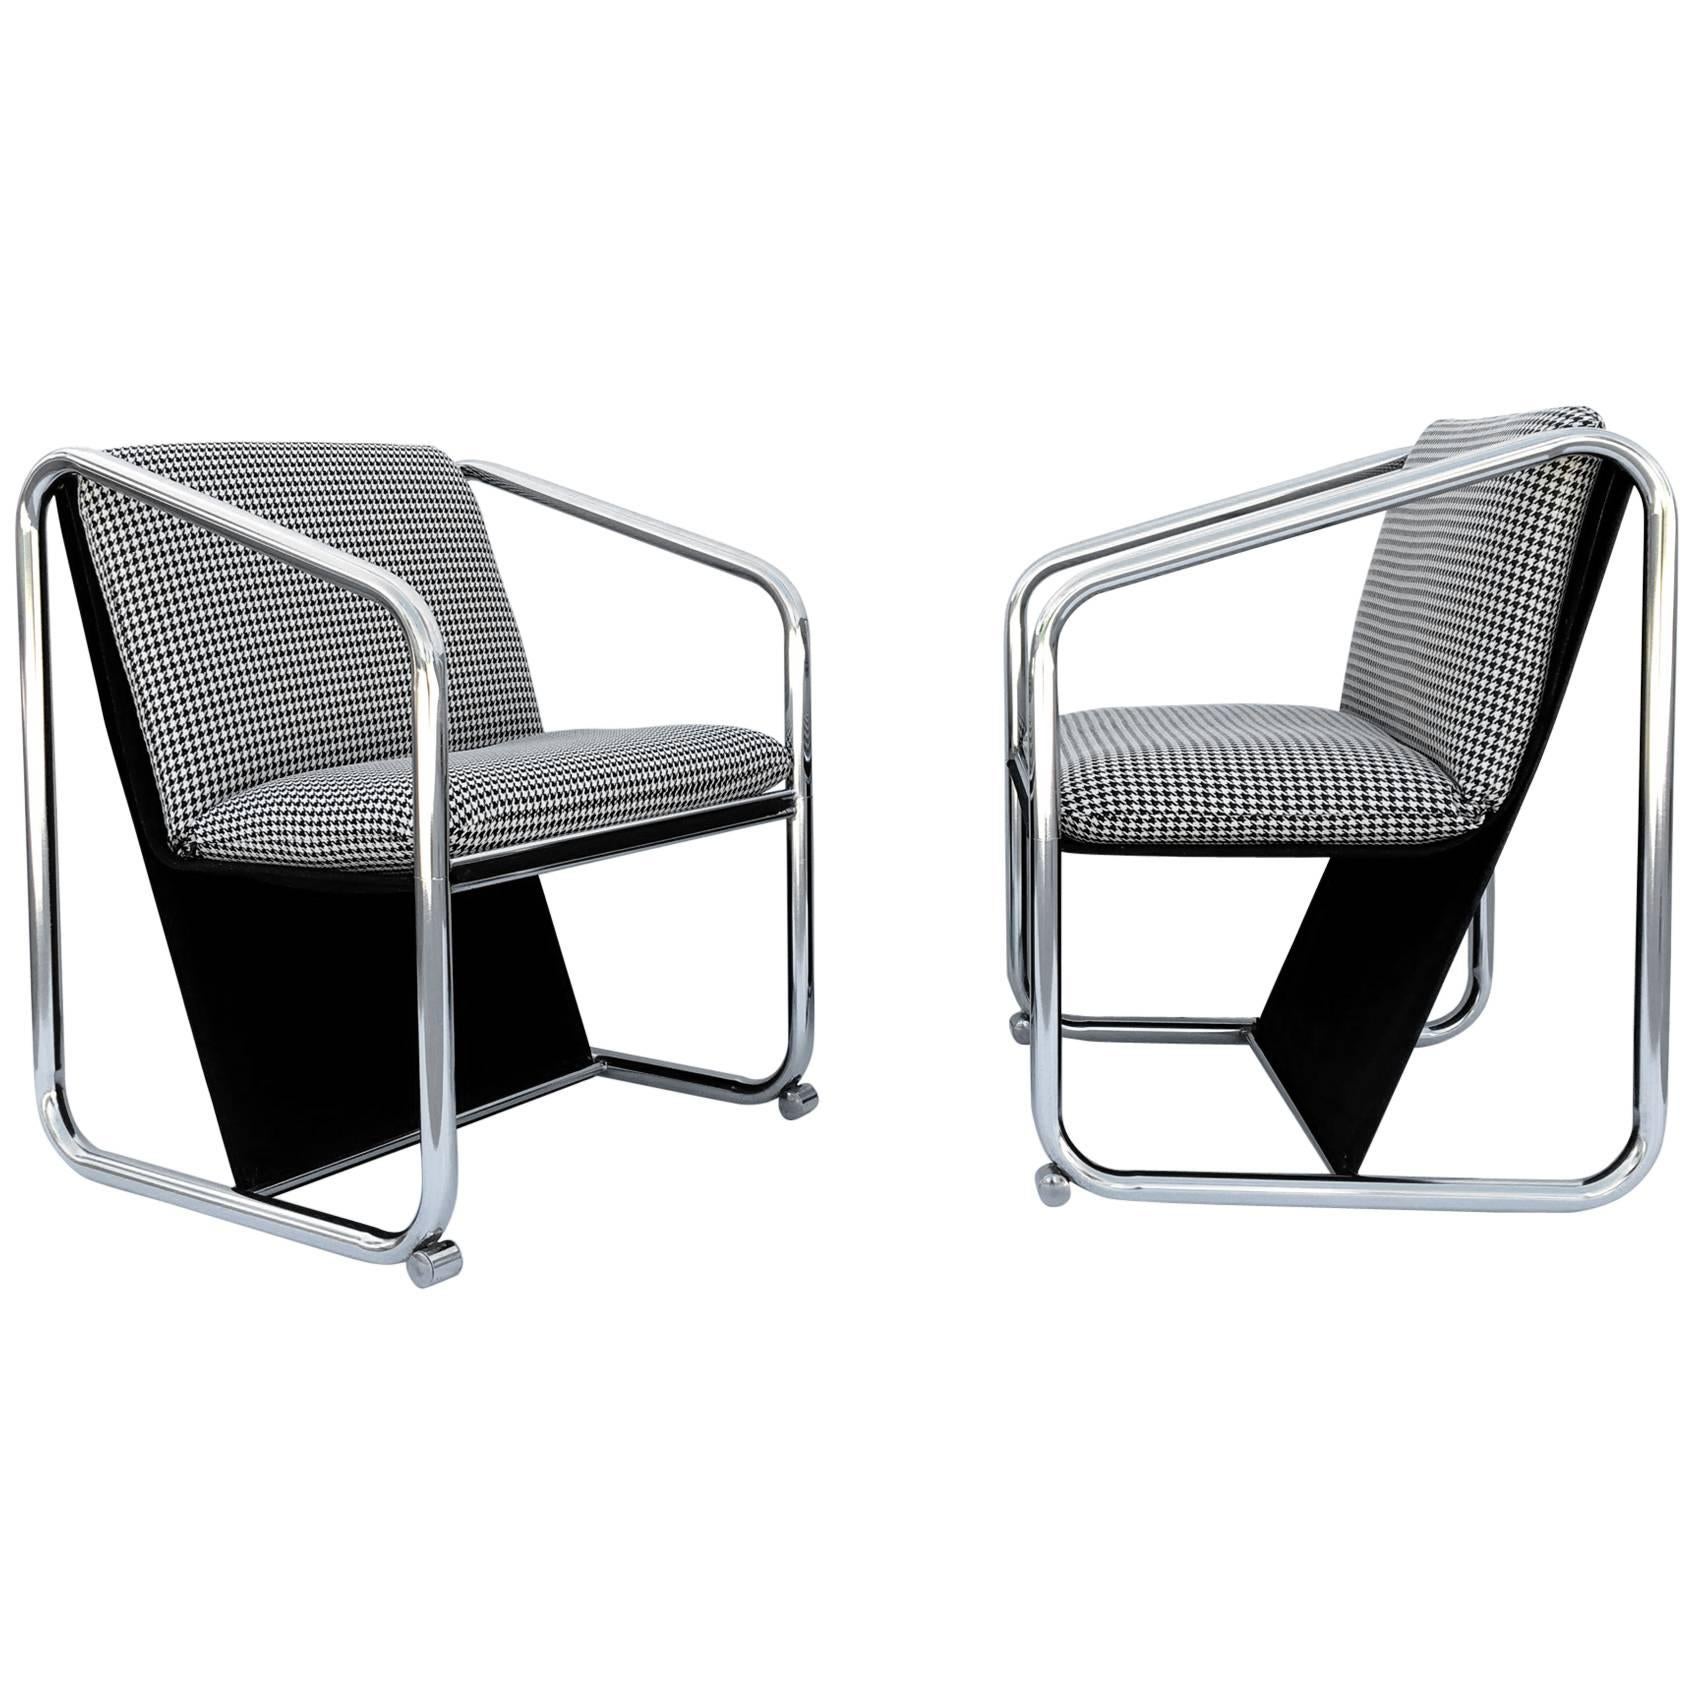 Rare Pair of Chrome Petite Lounge Chairs by Jerry Johnson